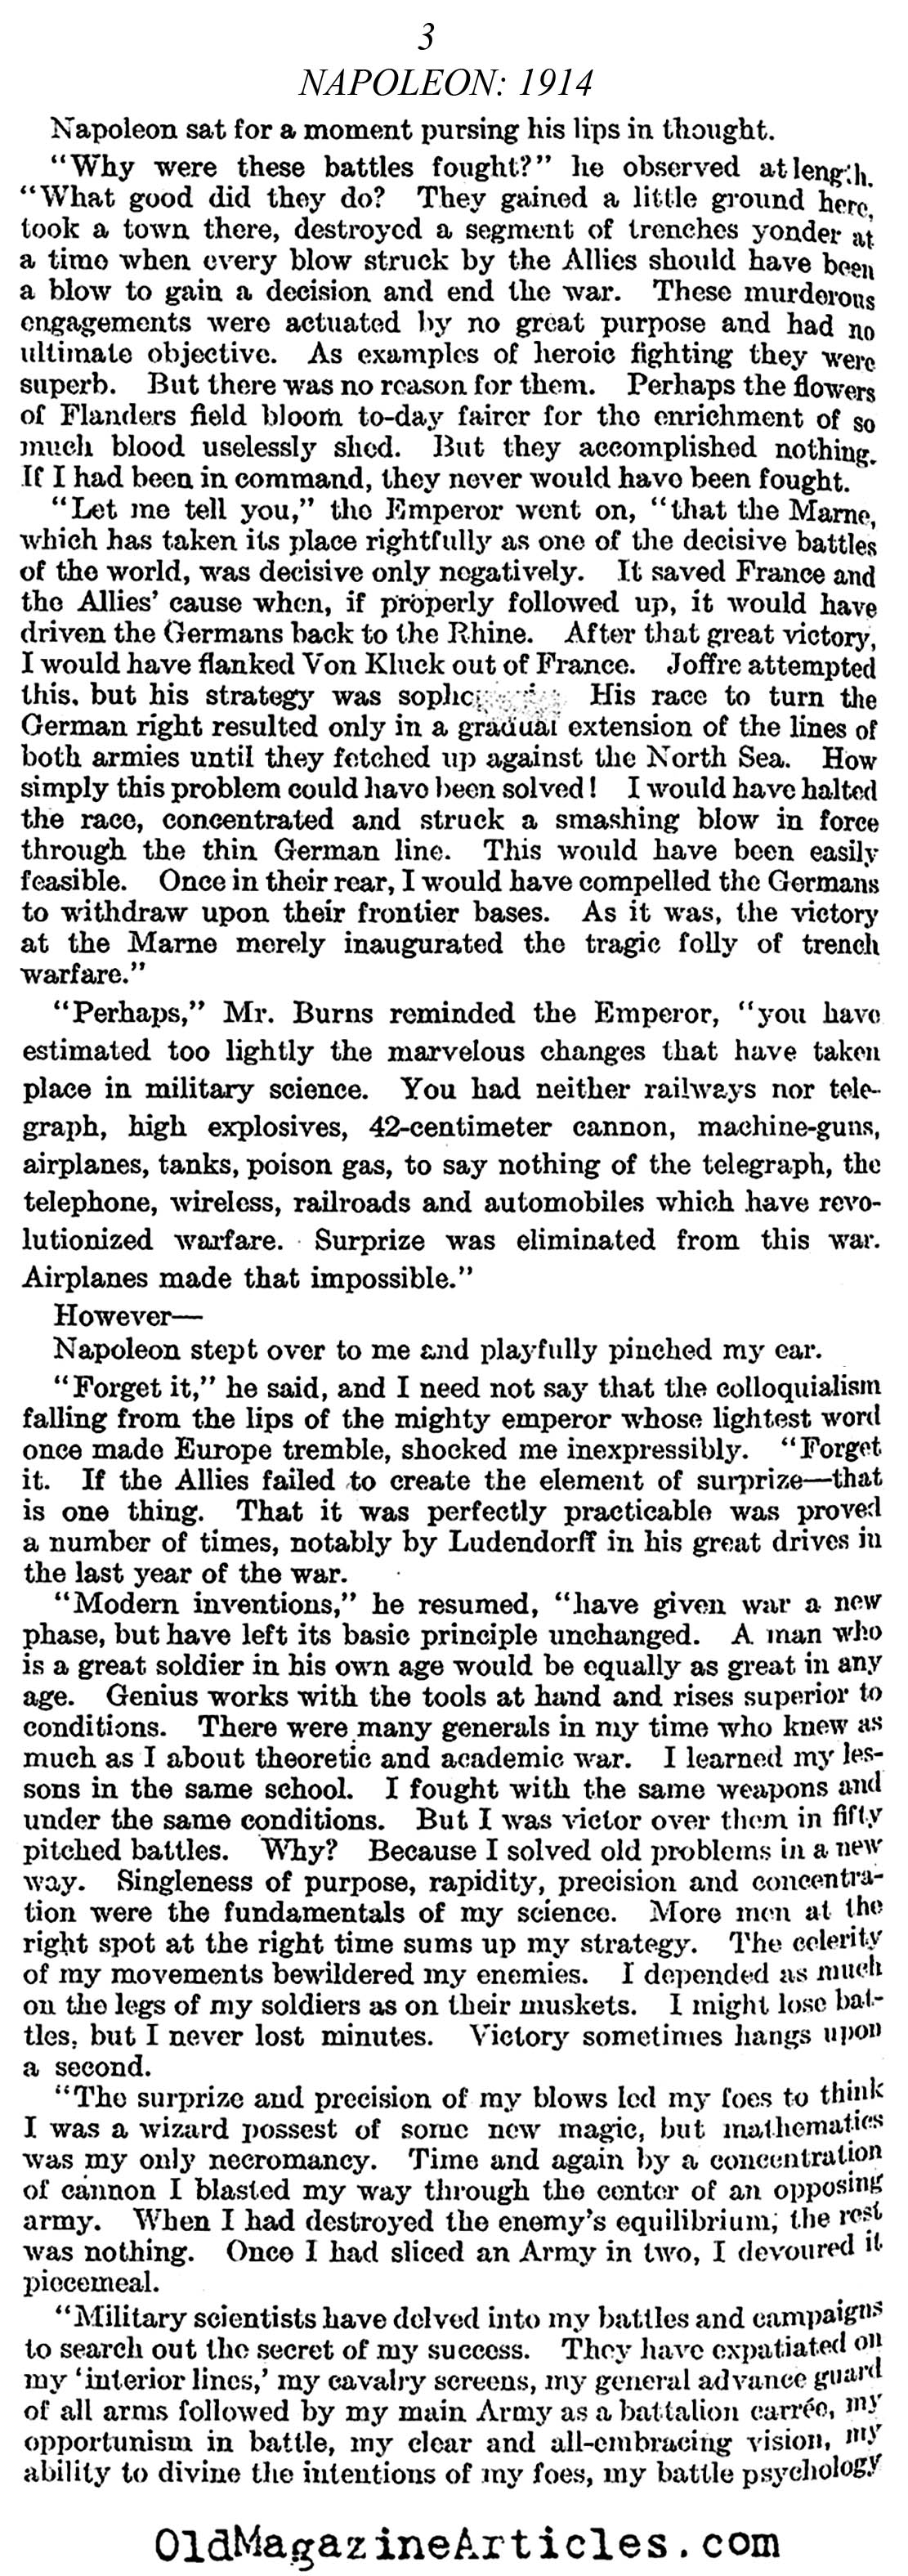 Napoleon Takes Charge (Literary Digest, 1922)